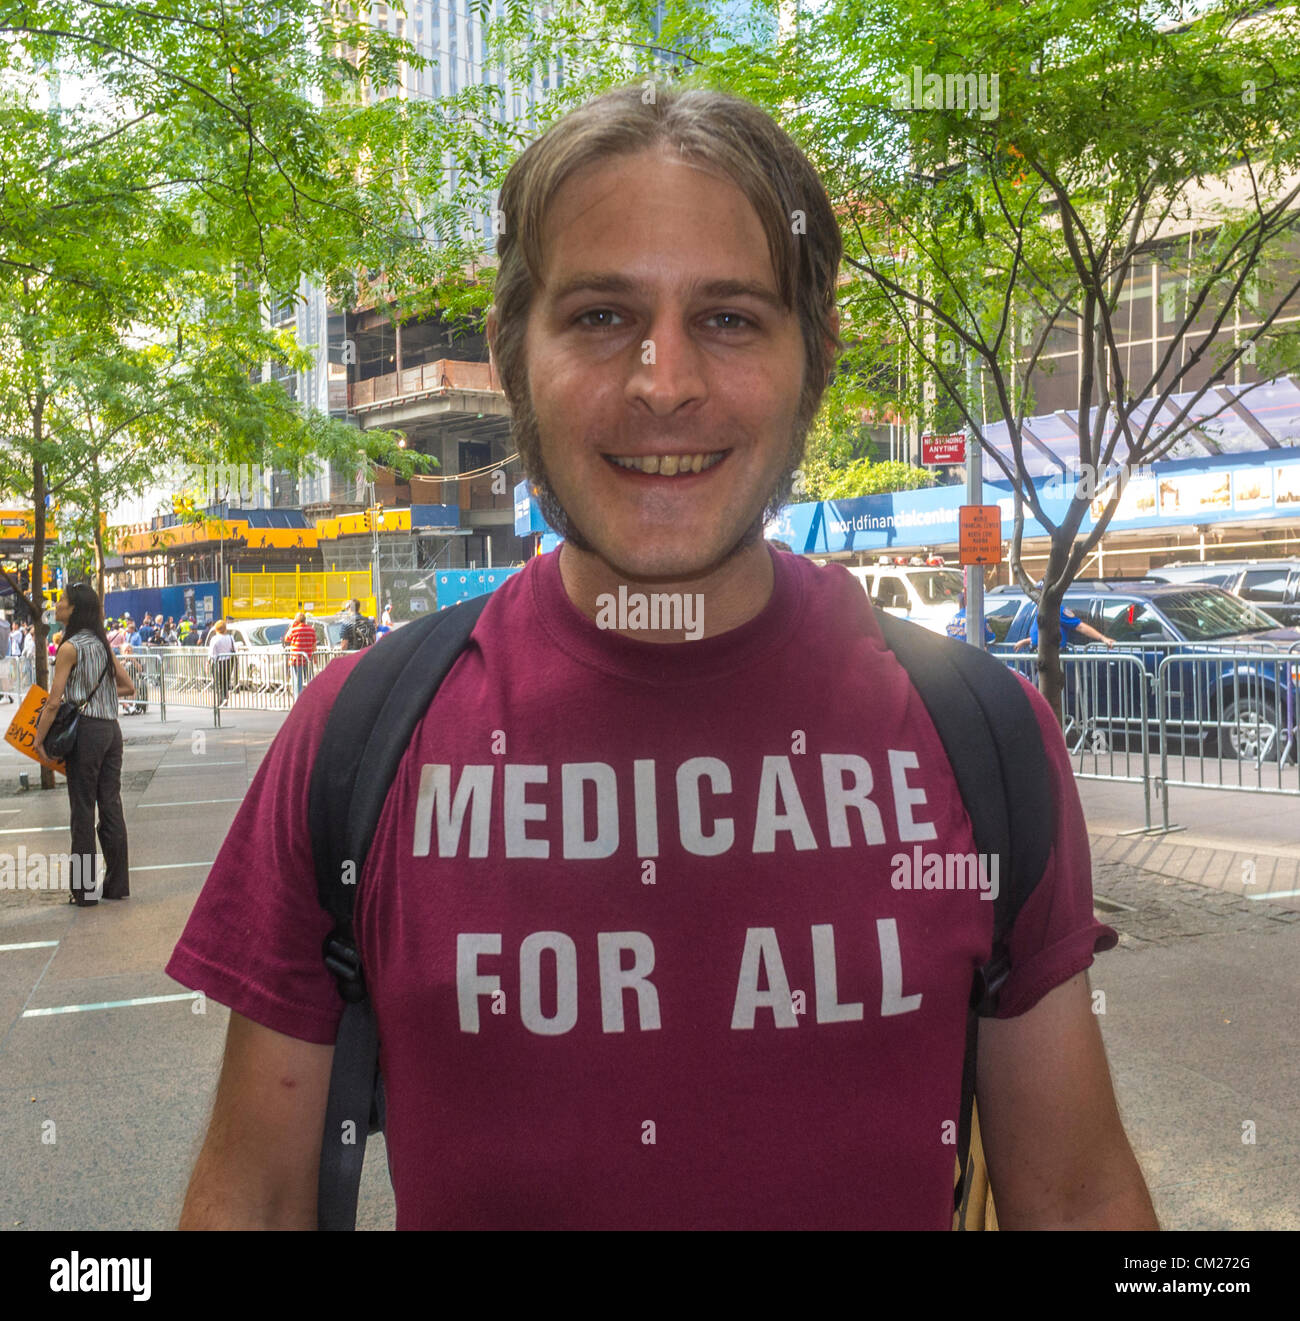 New York, protesta, Occupy Wall Street, Portrait Young Man con lo slogan "Medicare for All" attivista protesta, RITRATTO DI GUY ON STREET, slogan DI T-shirt Foto Stock